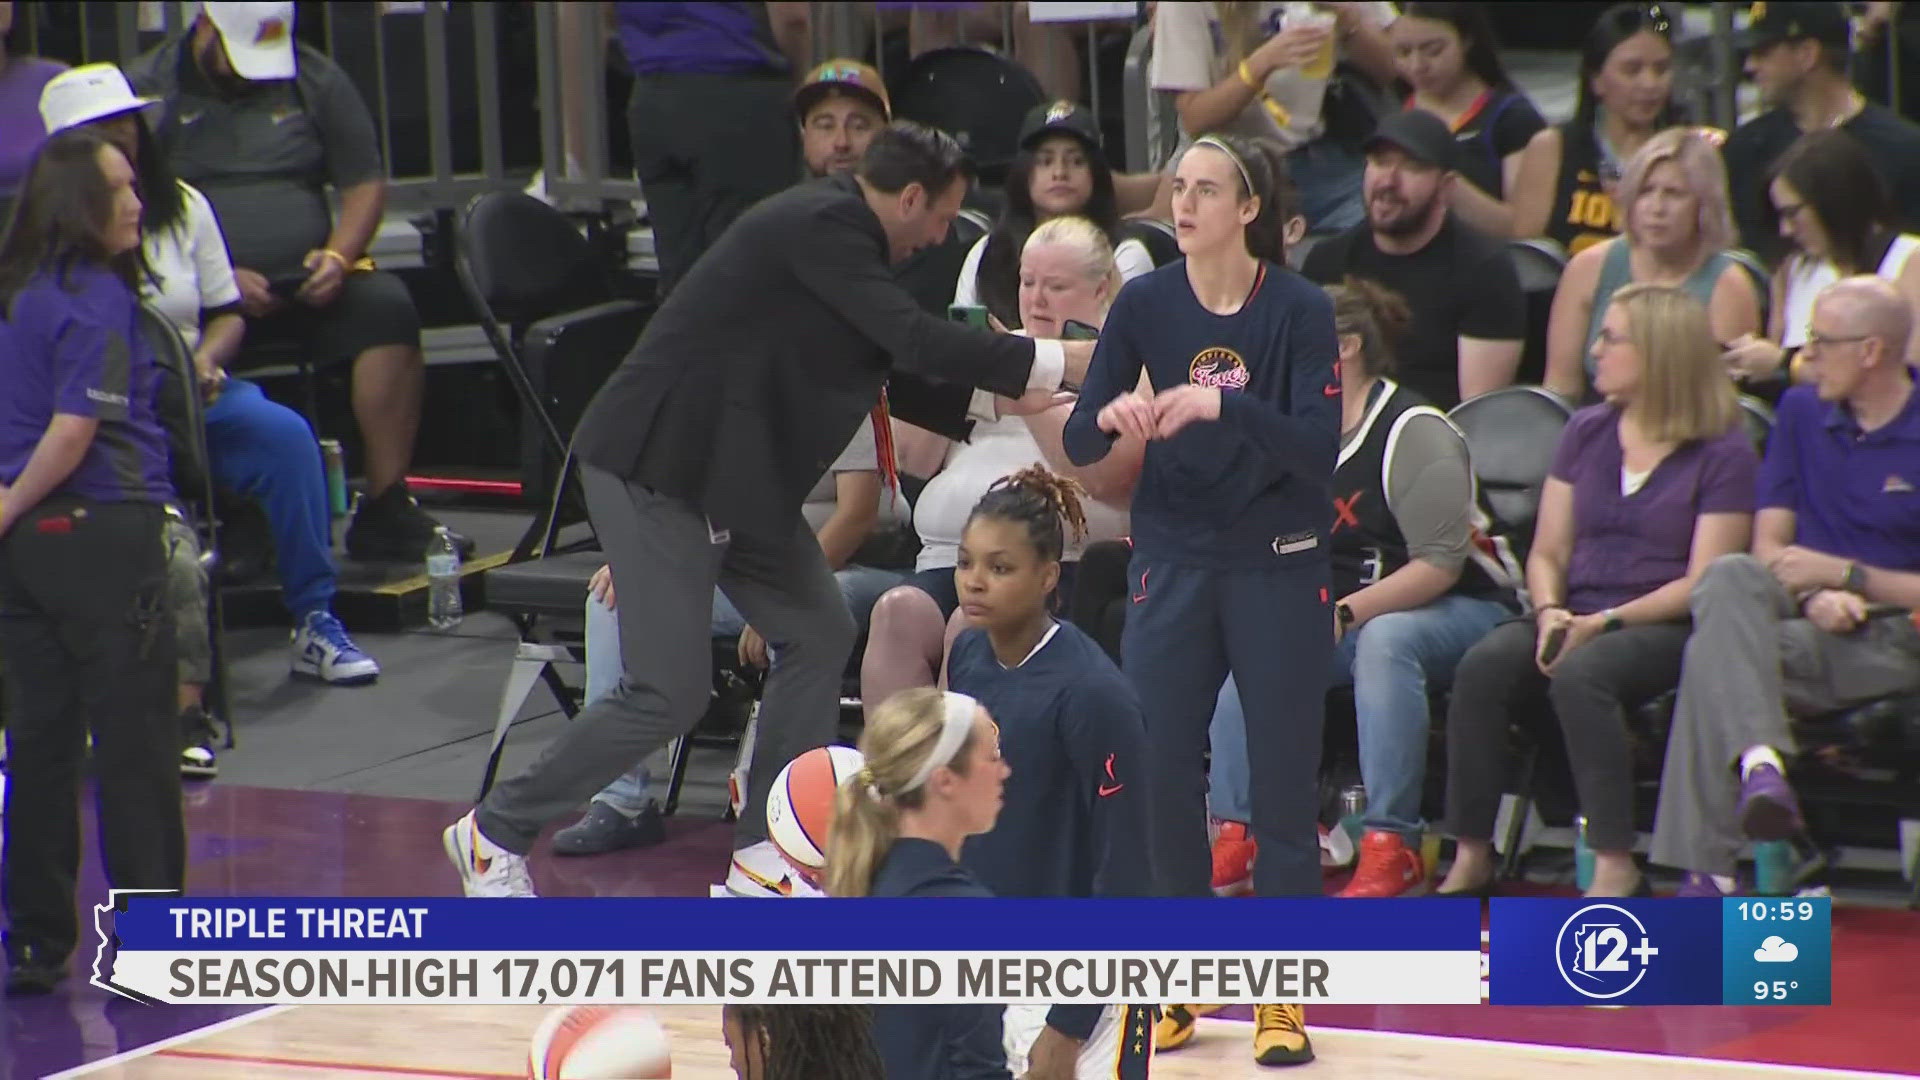 Fans flocked to the Footprint Center Sunday to watch rookie sensation Caitlin Clark play against the Phoenix Mercury. The 12Sports team talks about the atmosphere.